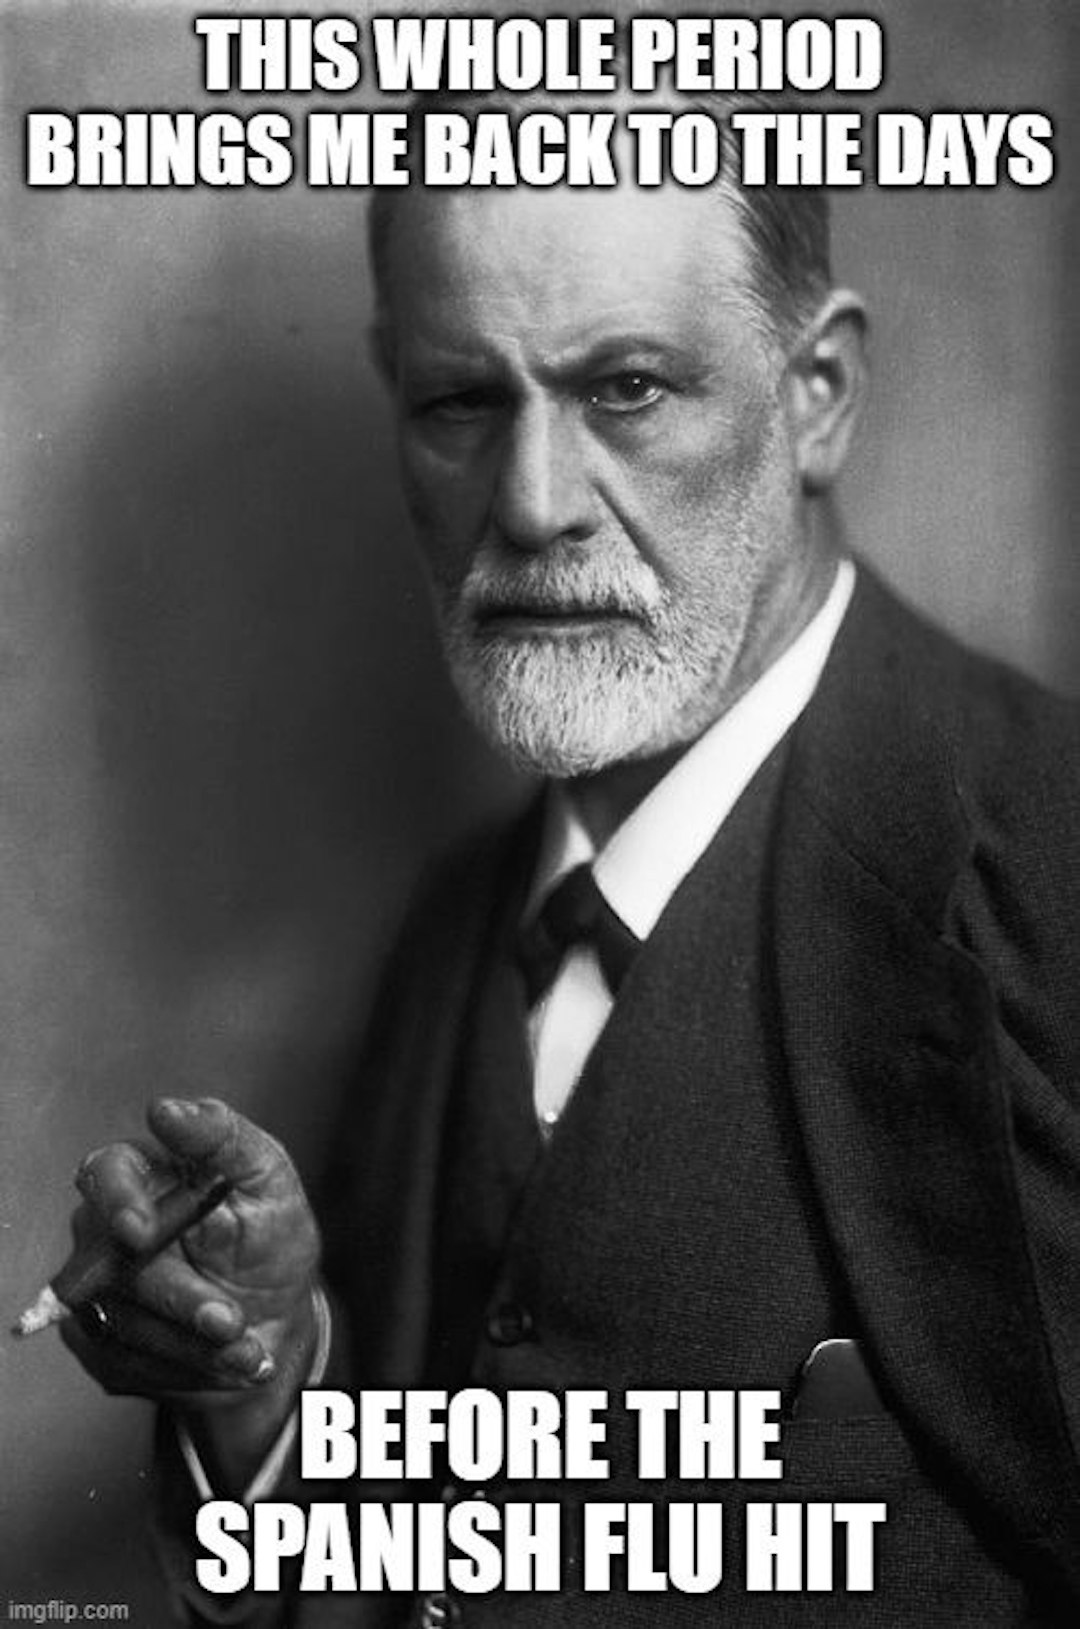 featured image - What Would Sigmund Freud Do? Advice on Remote Work and Marriage Counseling During The Pandemic